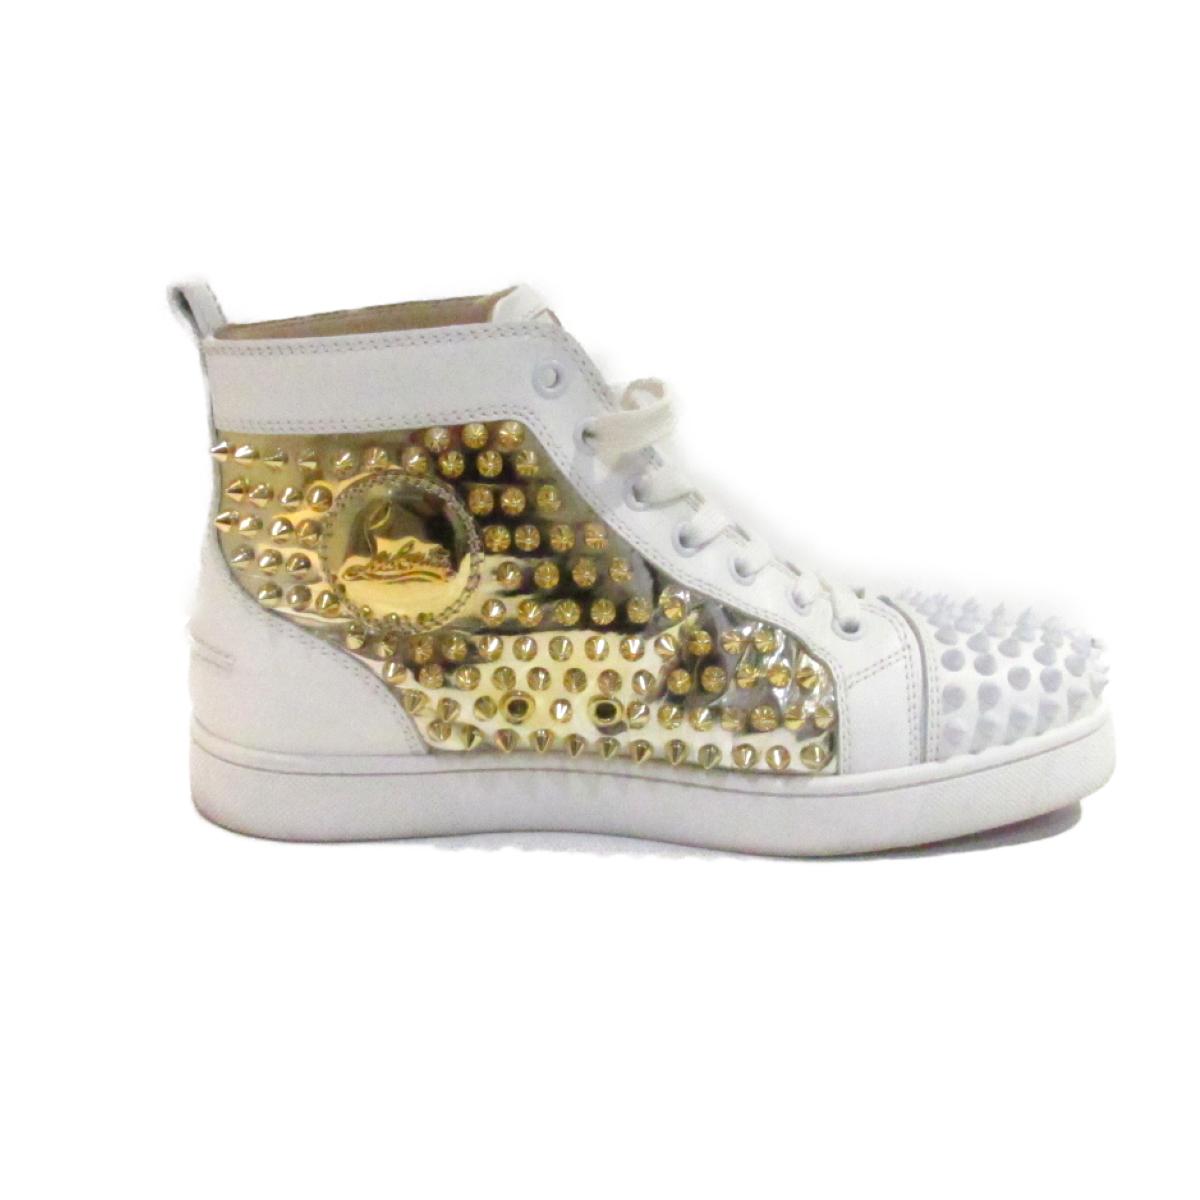 white and gold christian louboutins